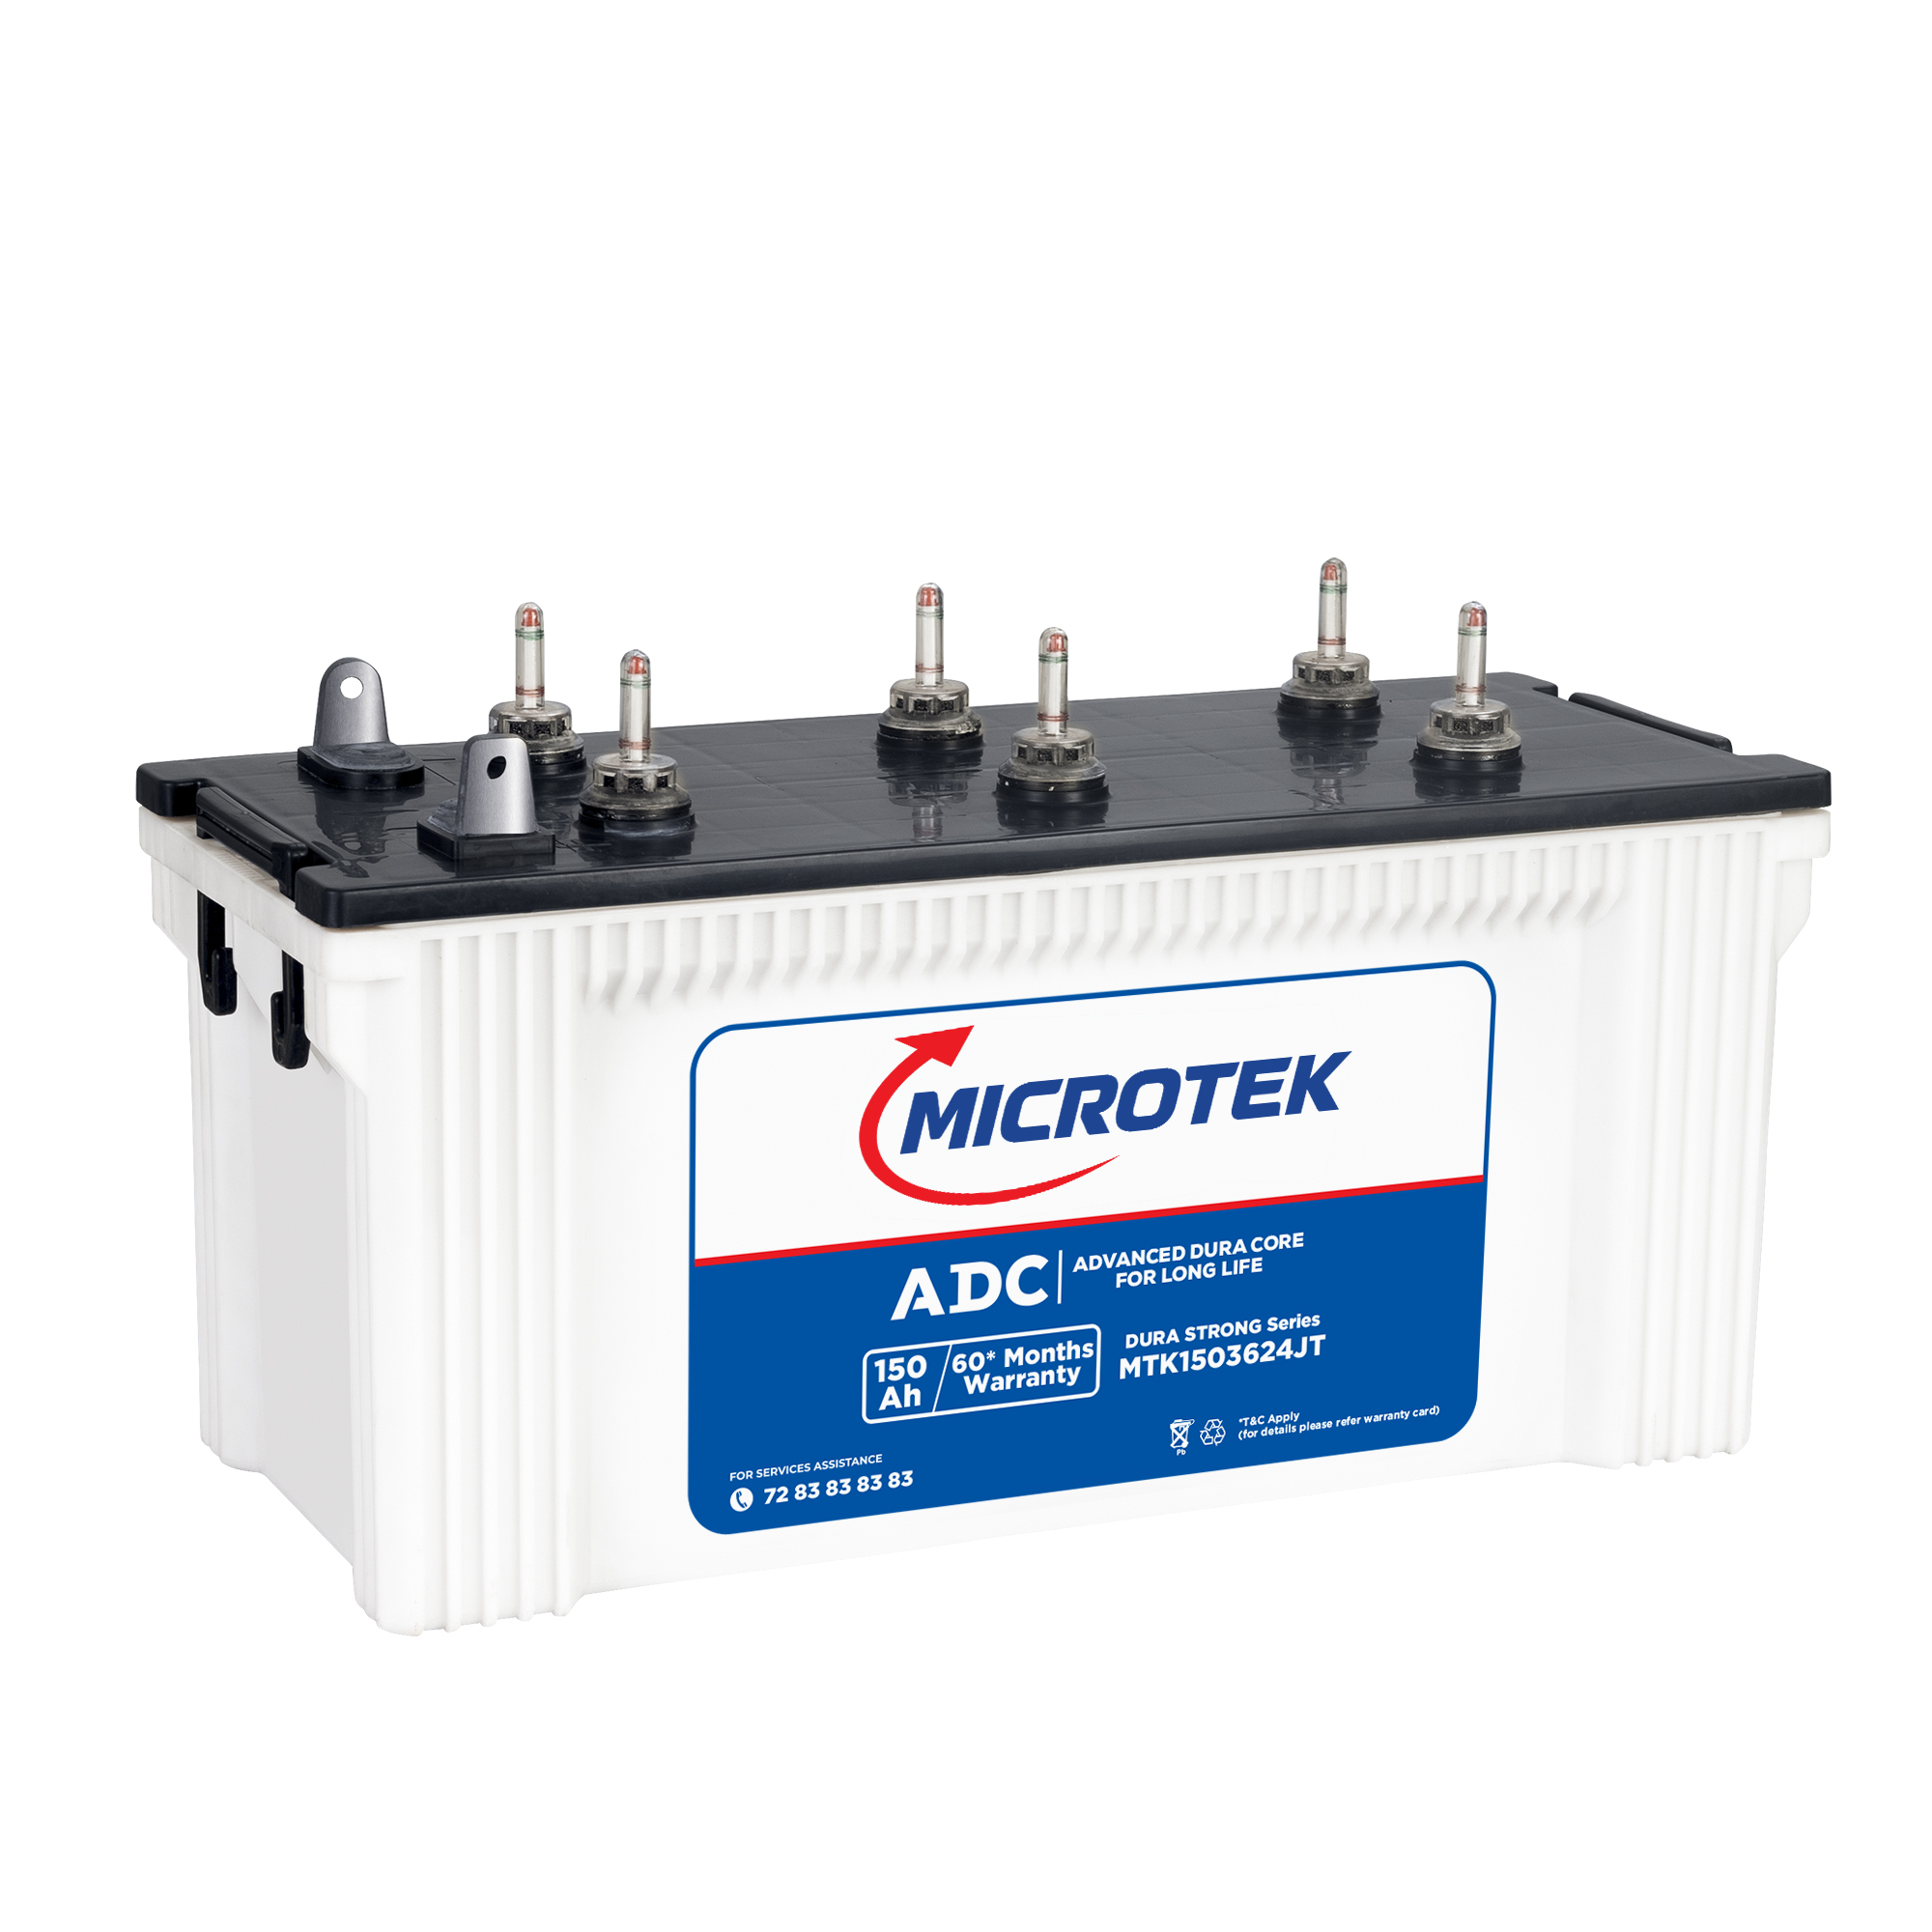 Microtek Dura STRONG MTK1503624JT 150Ah/12V Inverter Battery With Advanced Dura Core Technology